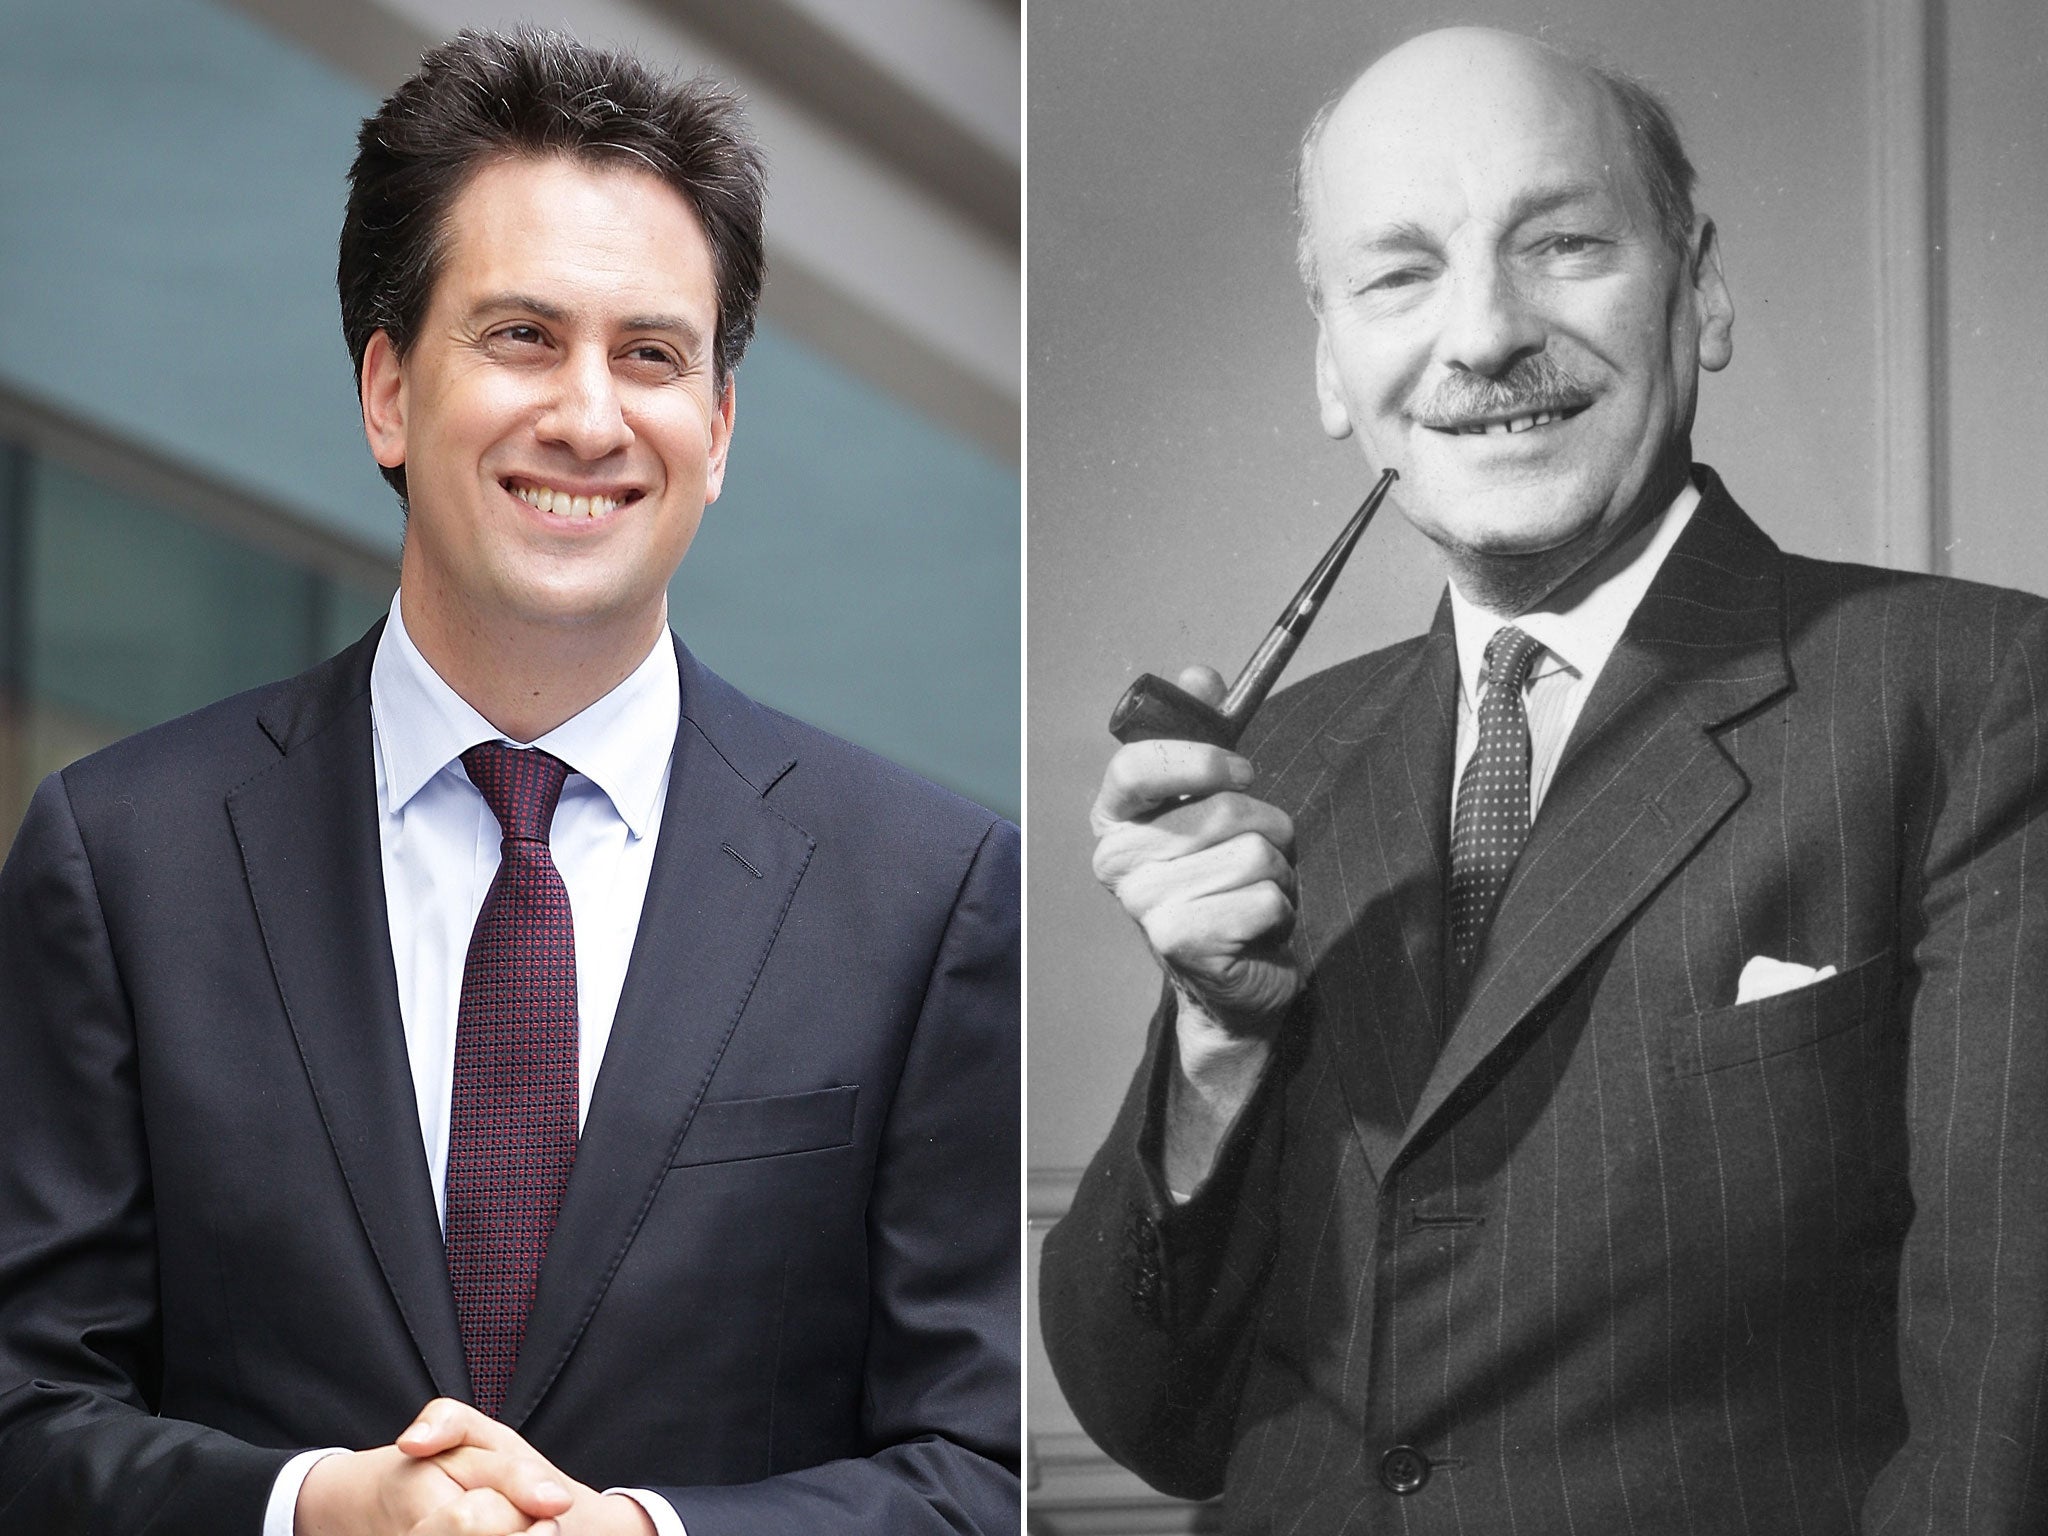 Miliband has been compared to Attlee by Blunkett: 'fantastic leader, not the most vibrant'